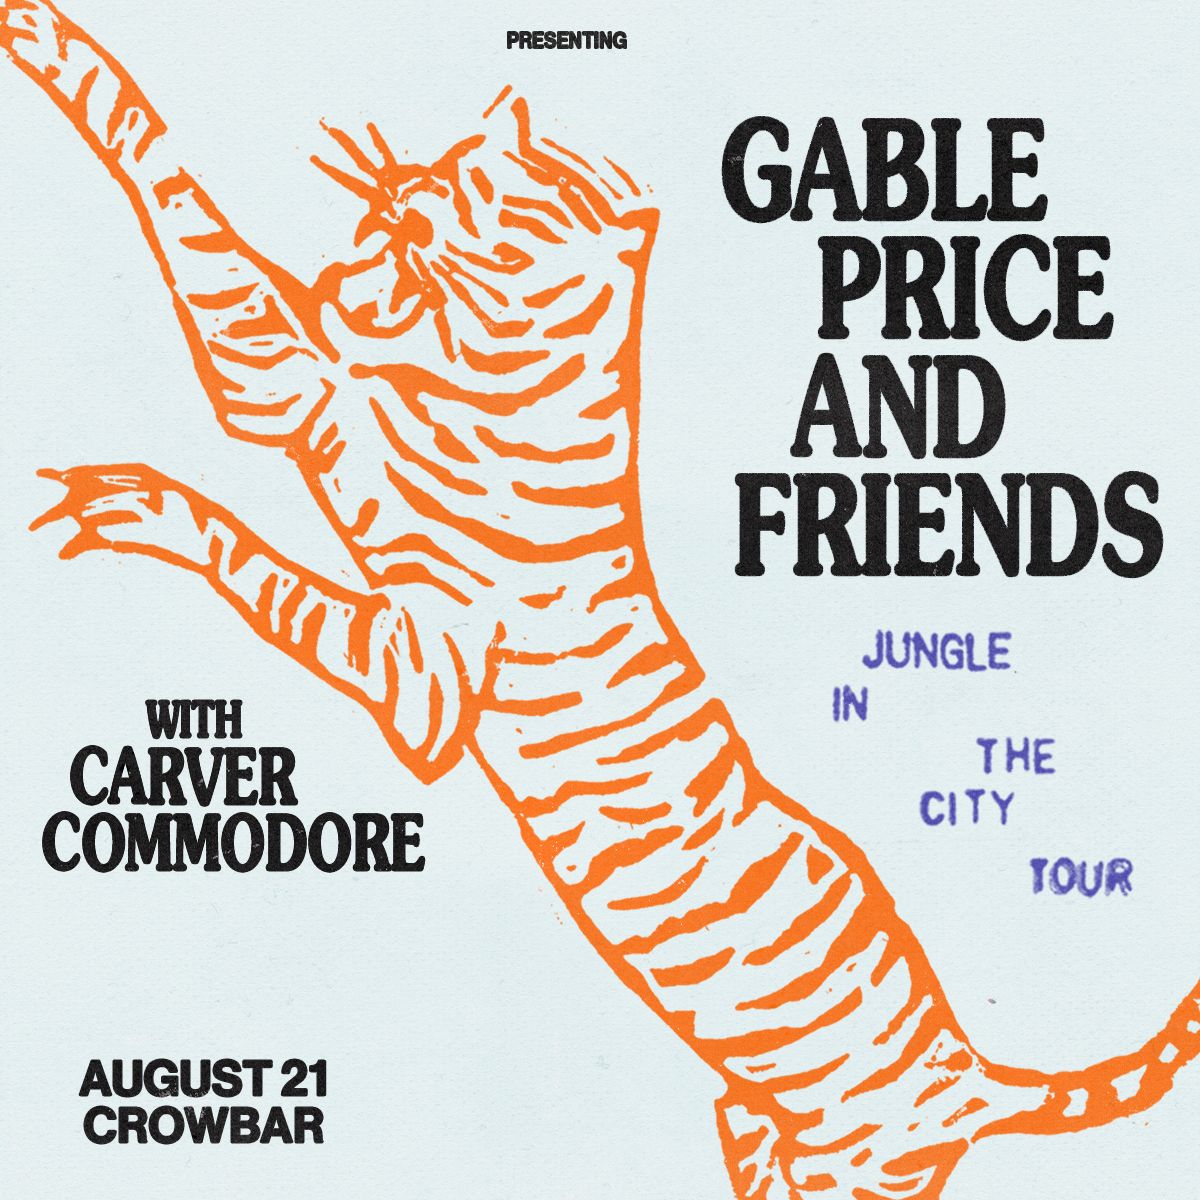 JUST ANNOUNCED

8/21
@gablepriceandfriends

Ticket Prices: ADV $20 / DOS $25 / VIP $75 (Includes Ticket)
Doors at 6:30PM

Venue Presale 5/16 10AM PW: inthecity24
Fan Club/Social Presale: 5/16 10AM PW: JUNGLE
Public On Sale: 5/ 10AM

Tickets buff.ly/3WIqQRo

@aegpresentsse